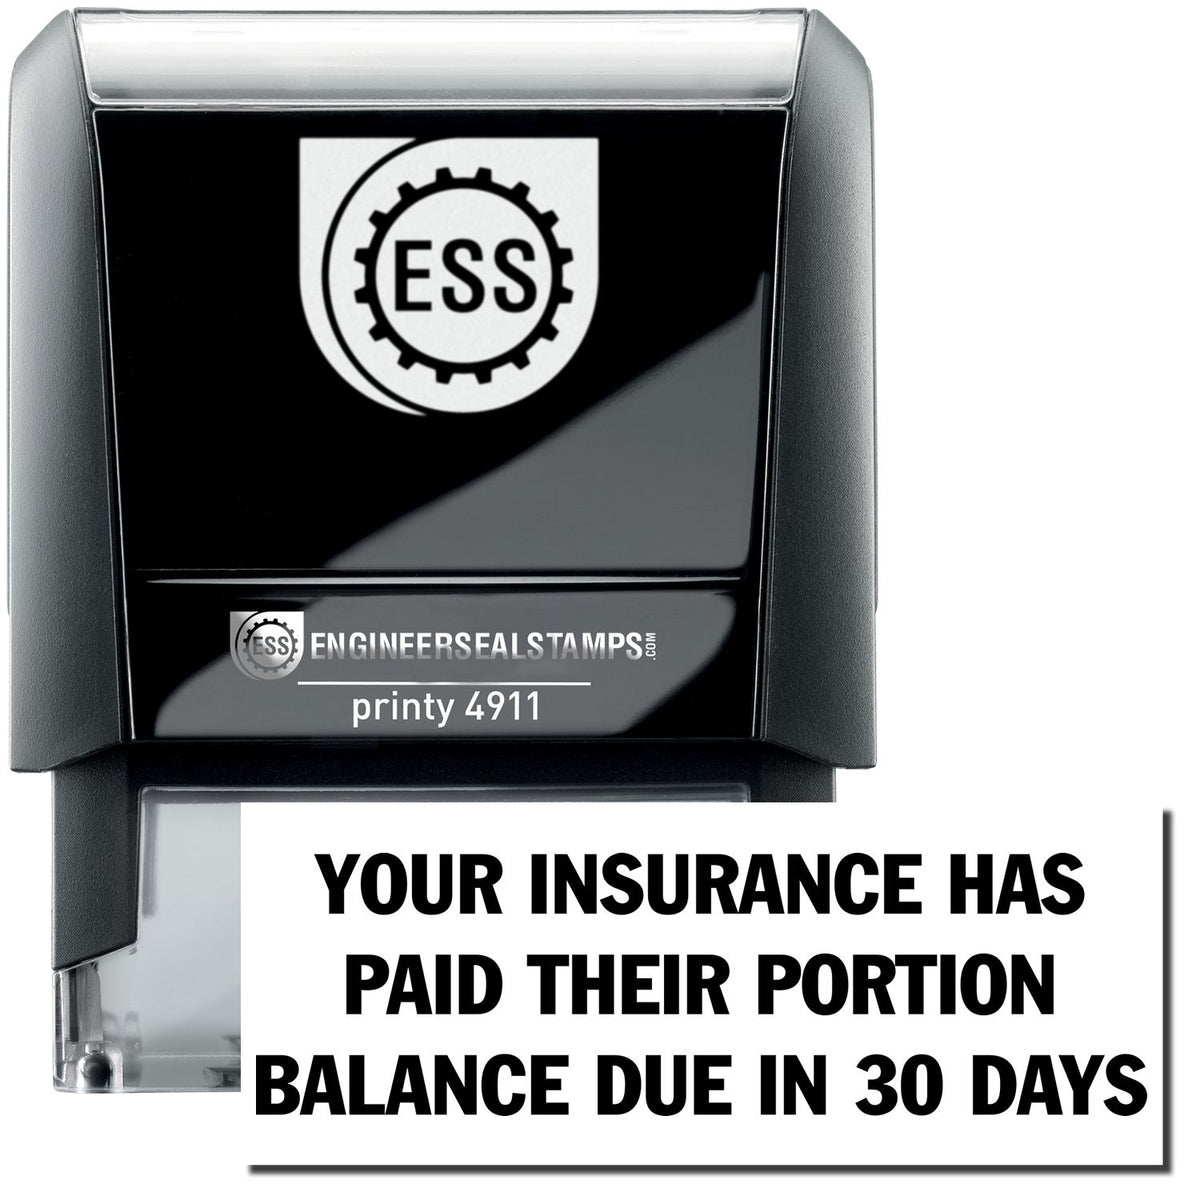 A self-inking stamp with a stamped image showing how the texts &quot;YOUR INSURANCE HAS PAID THEIR PORTION&quot; and &quot;BALANCE DUE IN 30 DAYS&quot; are displayed after stamping.